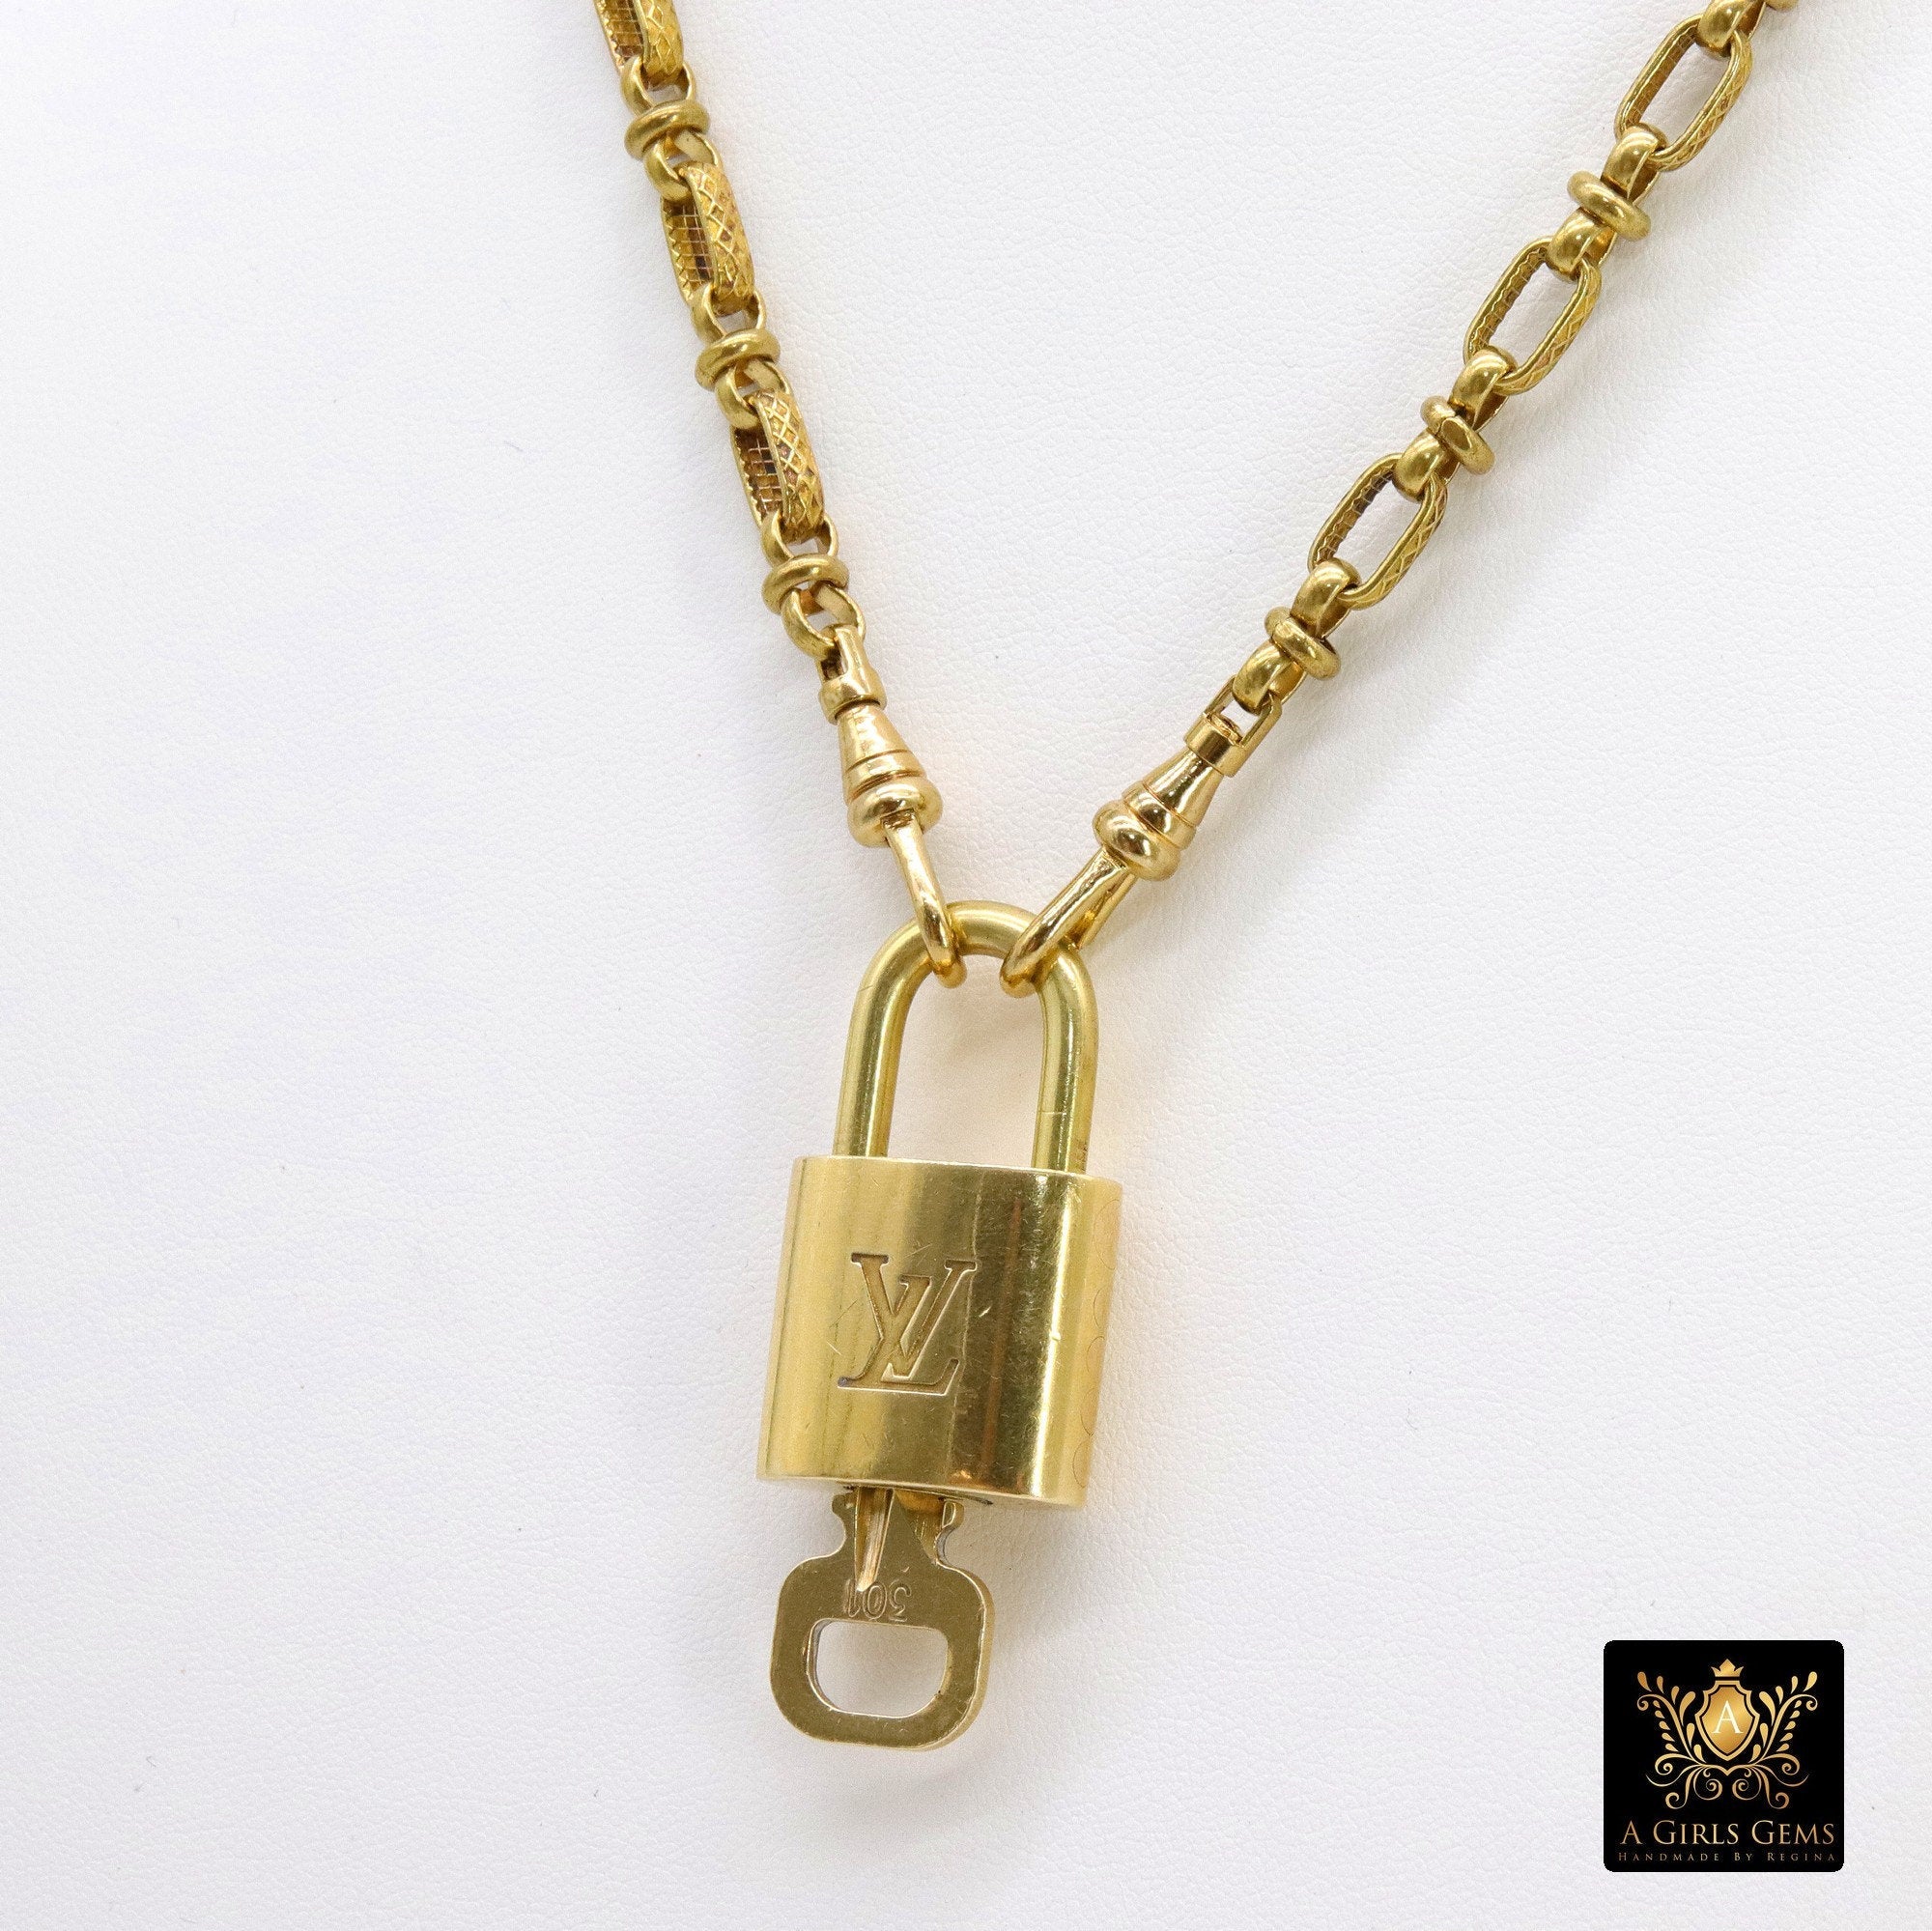 Lock and Key Fob Necklace, Gold LV Lock and Textured – Girls Gems